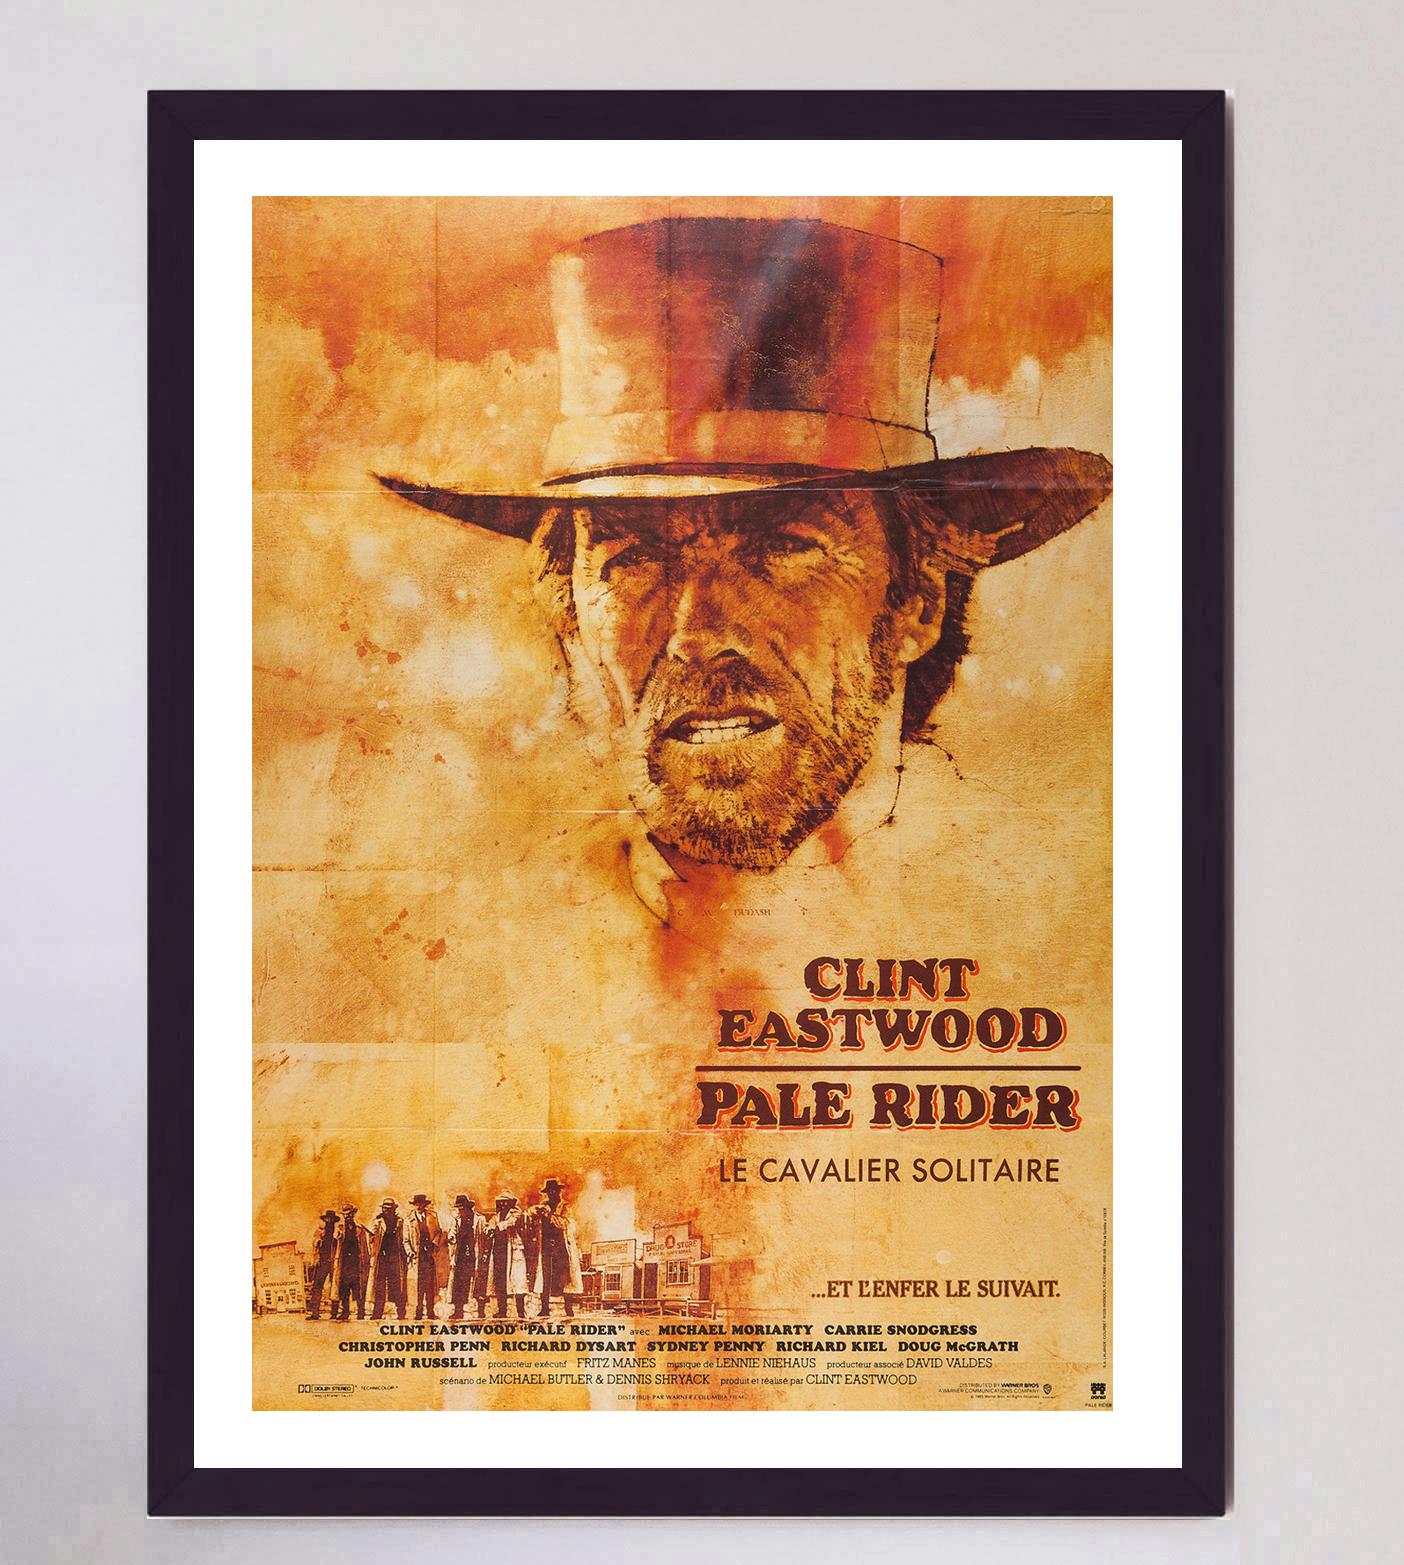 Paper 1985 Pale Rider (French) Original Vintage Poster For Sale